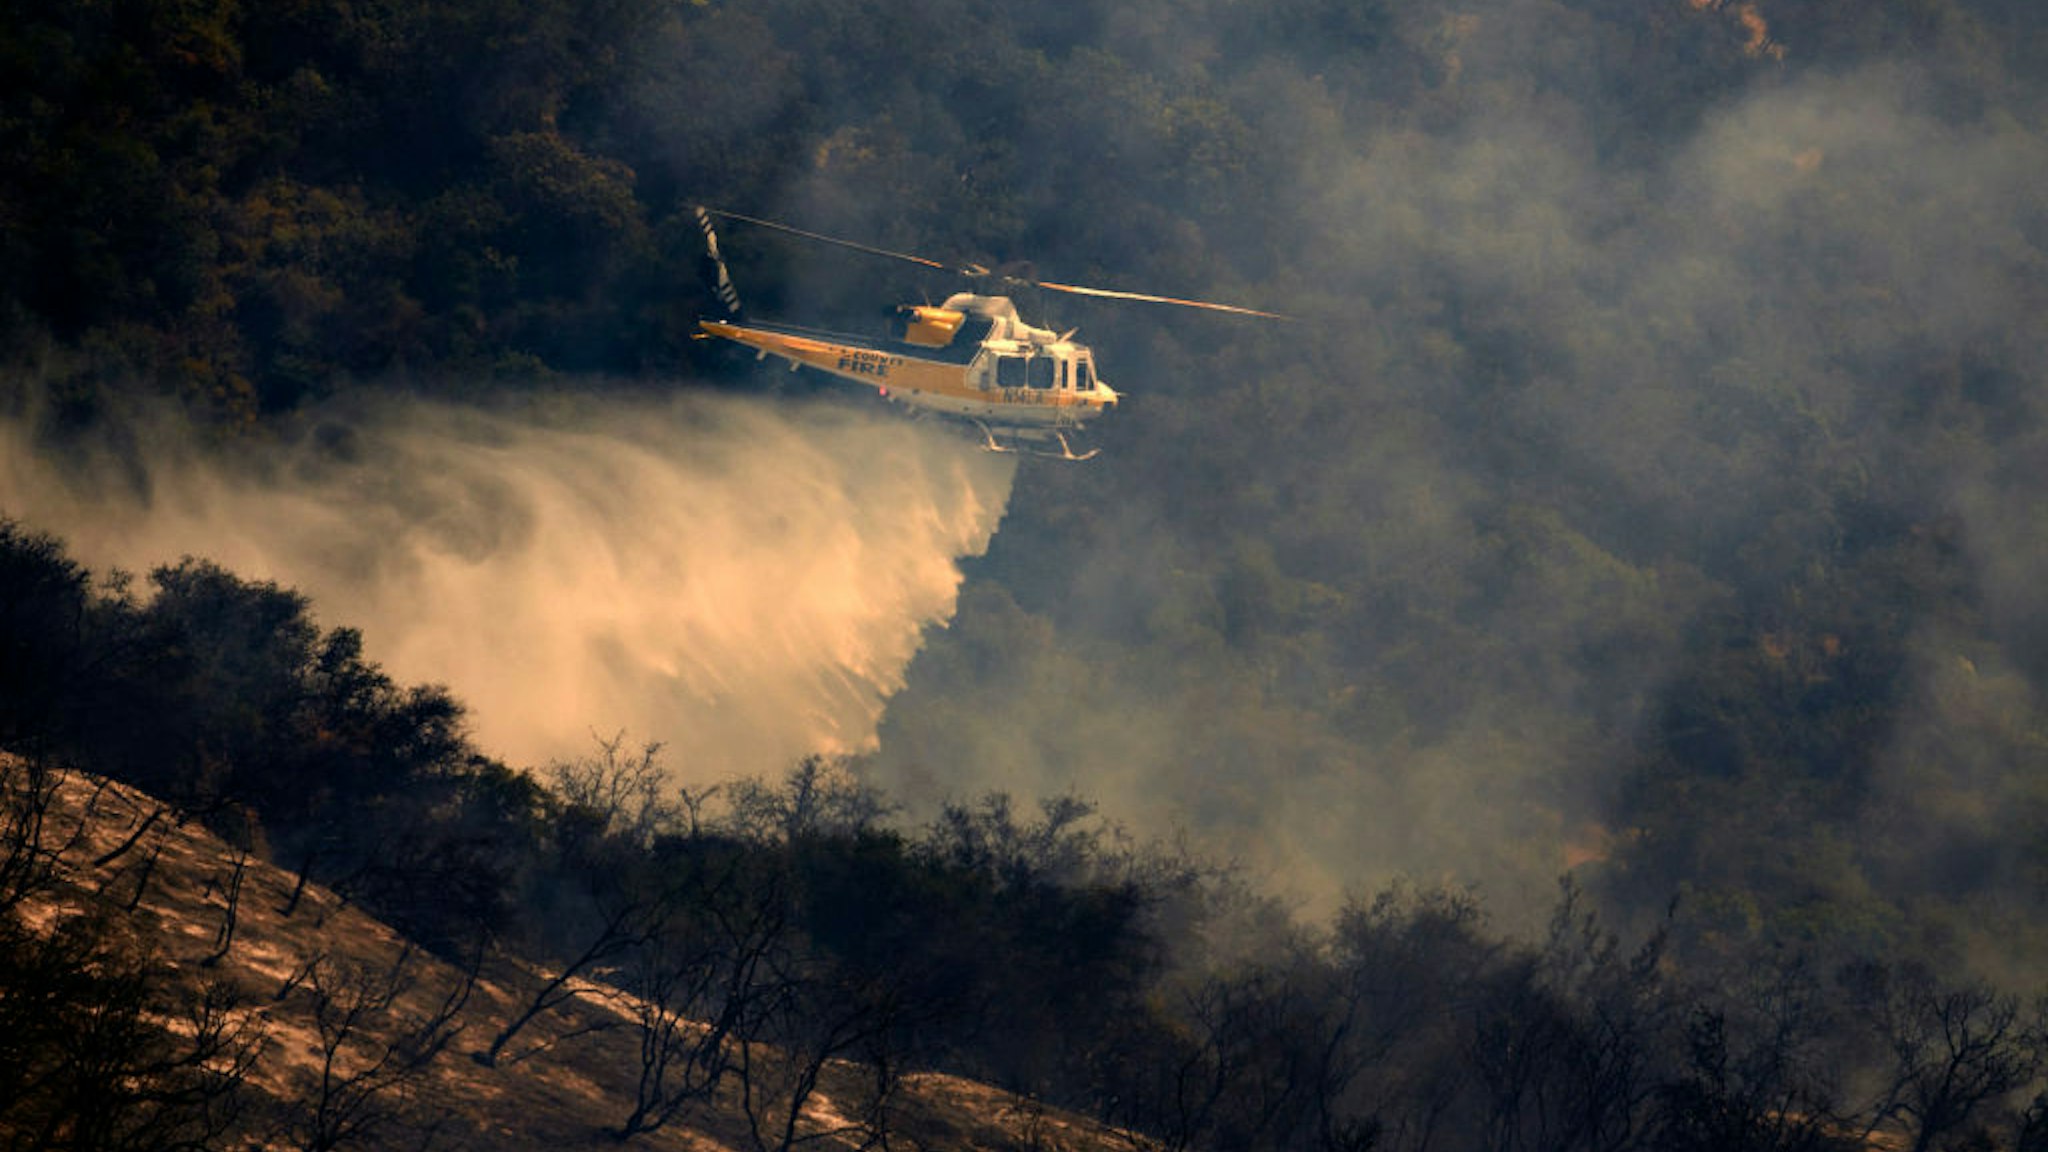 A helicopter makes a water drop on a wildfire in Mandeville Canyon in Los Angeles, California on May 28, 2017. More than 150 firefighters battle the fire that burns near multi-million dollar homes in the Brentwood neighborhood.